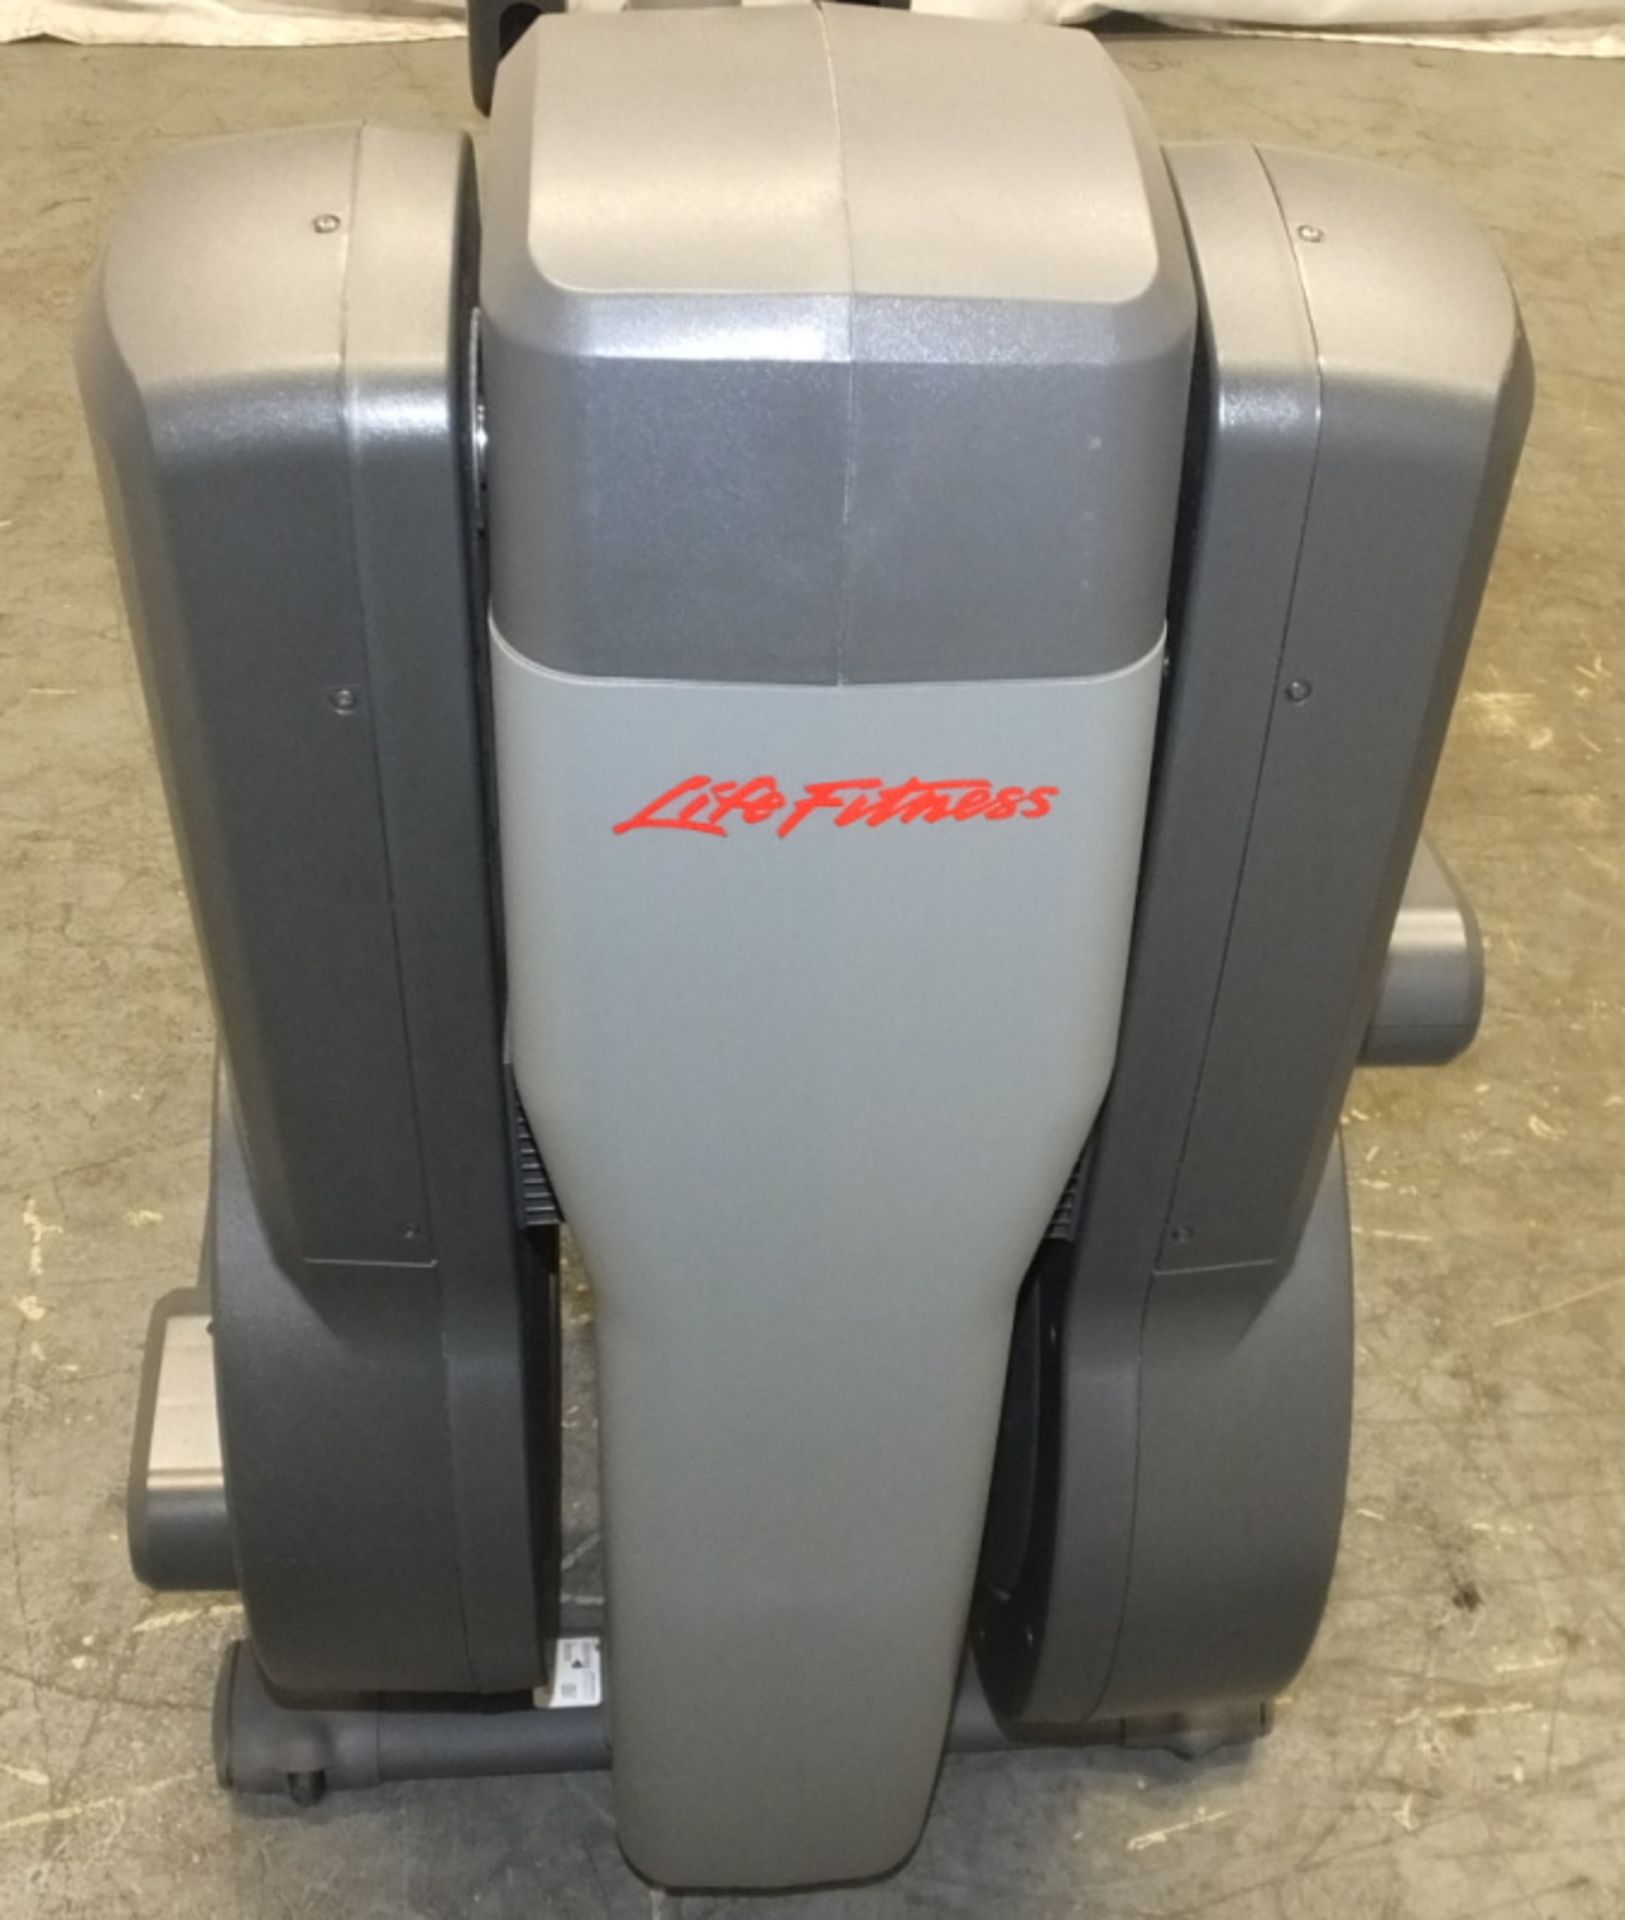 Life Fitness 95x Elliptical Cross Trainer - please check pictures for condition - Image 3 of 16